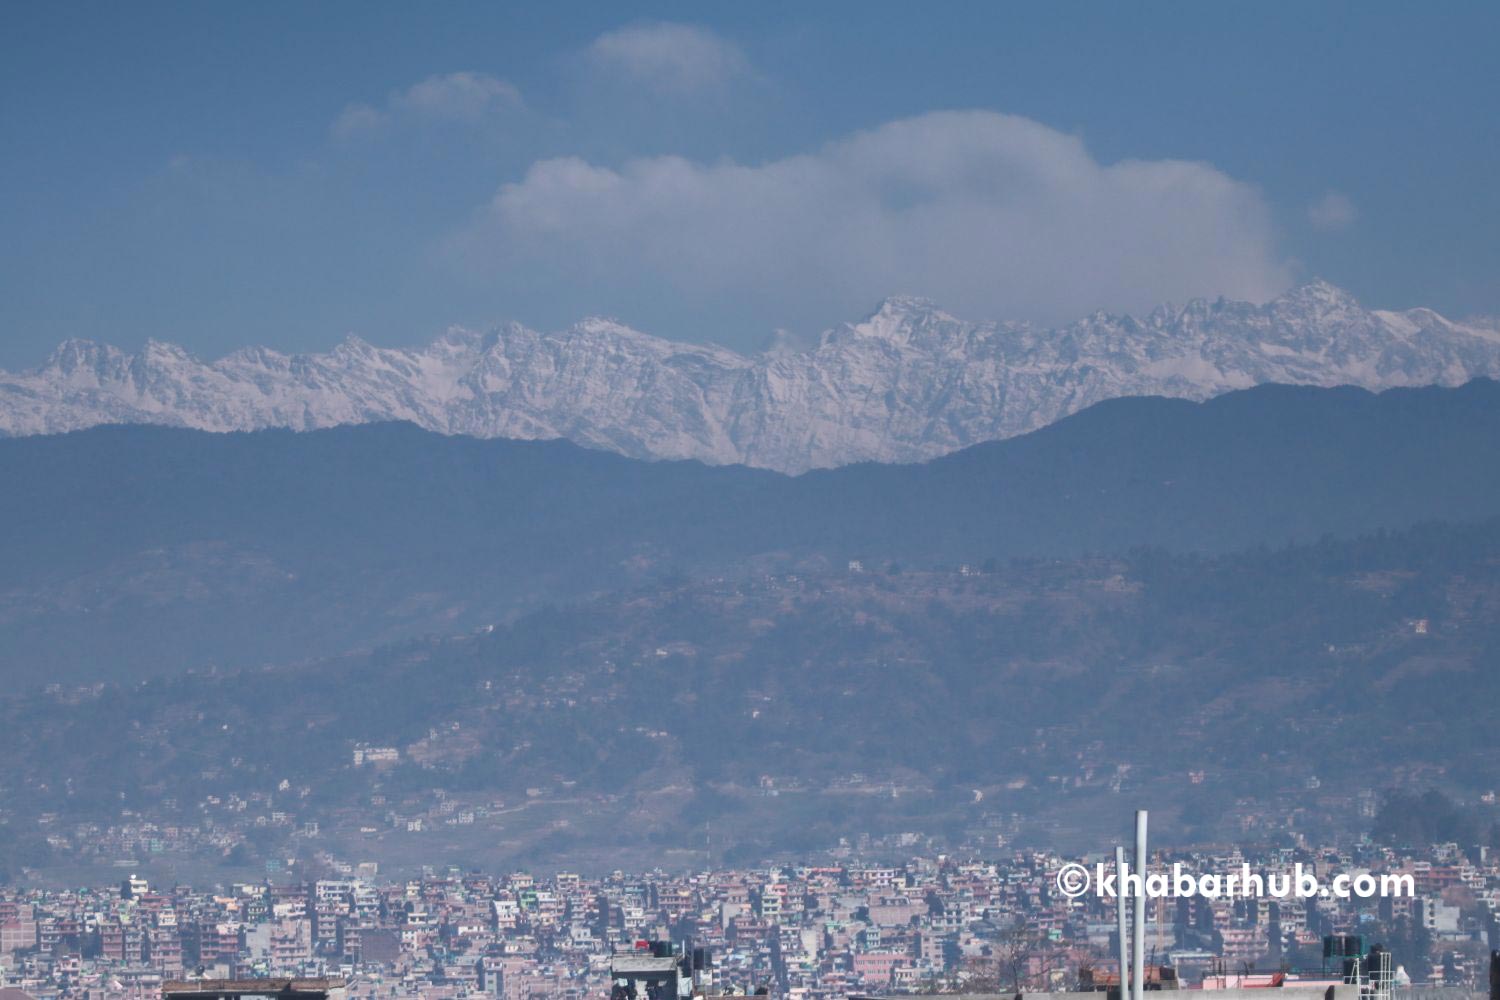 Kathmandu becomes the most polluted city in the world